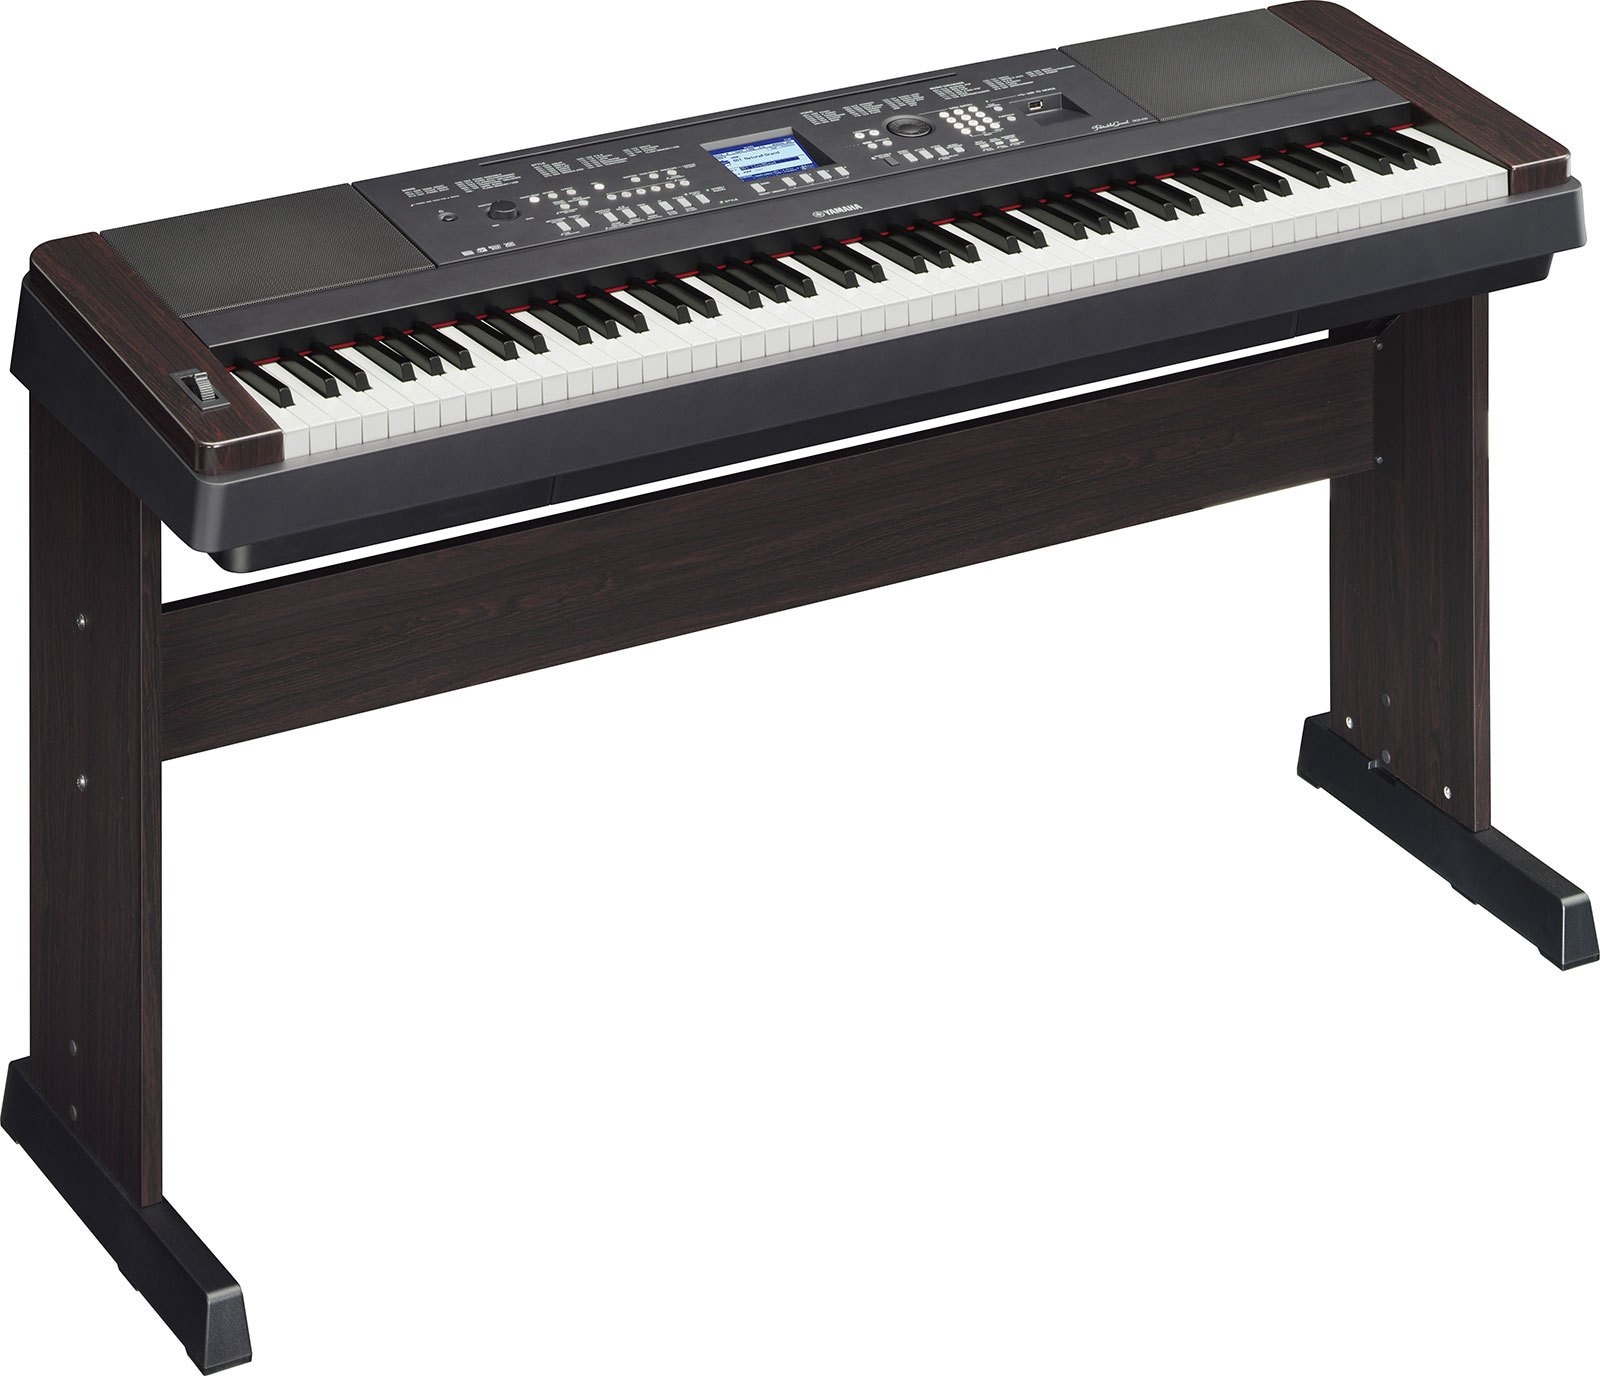 werkwoord Onweersbui Worden DGX-650 - Overview - Portable Grand - Pianos - Musical Instruments -  Products - Yamaha - United States